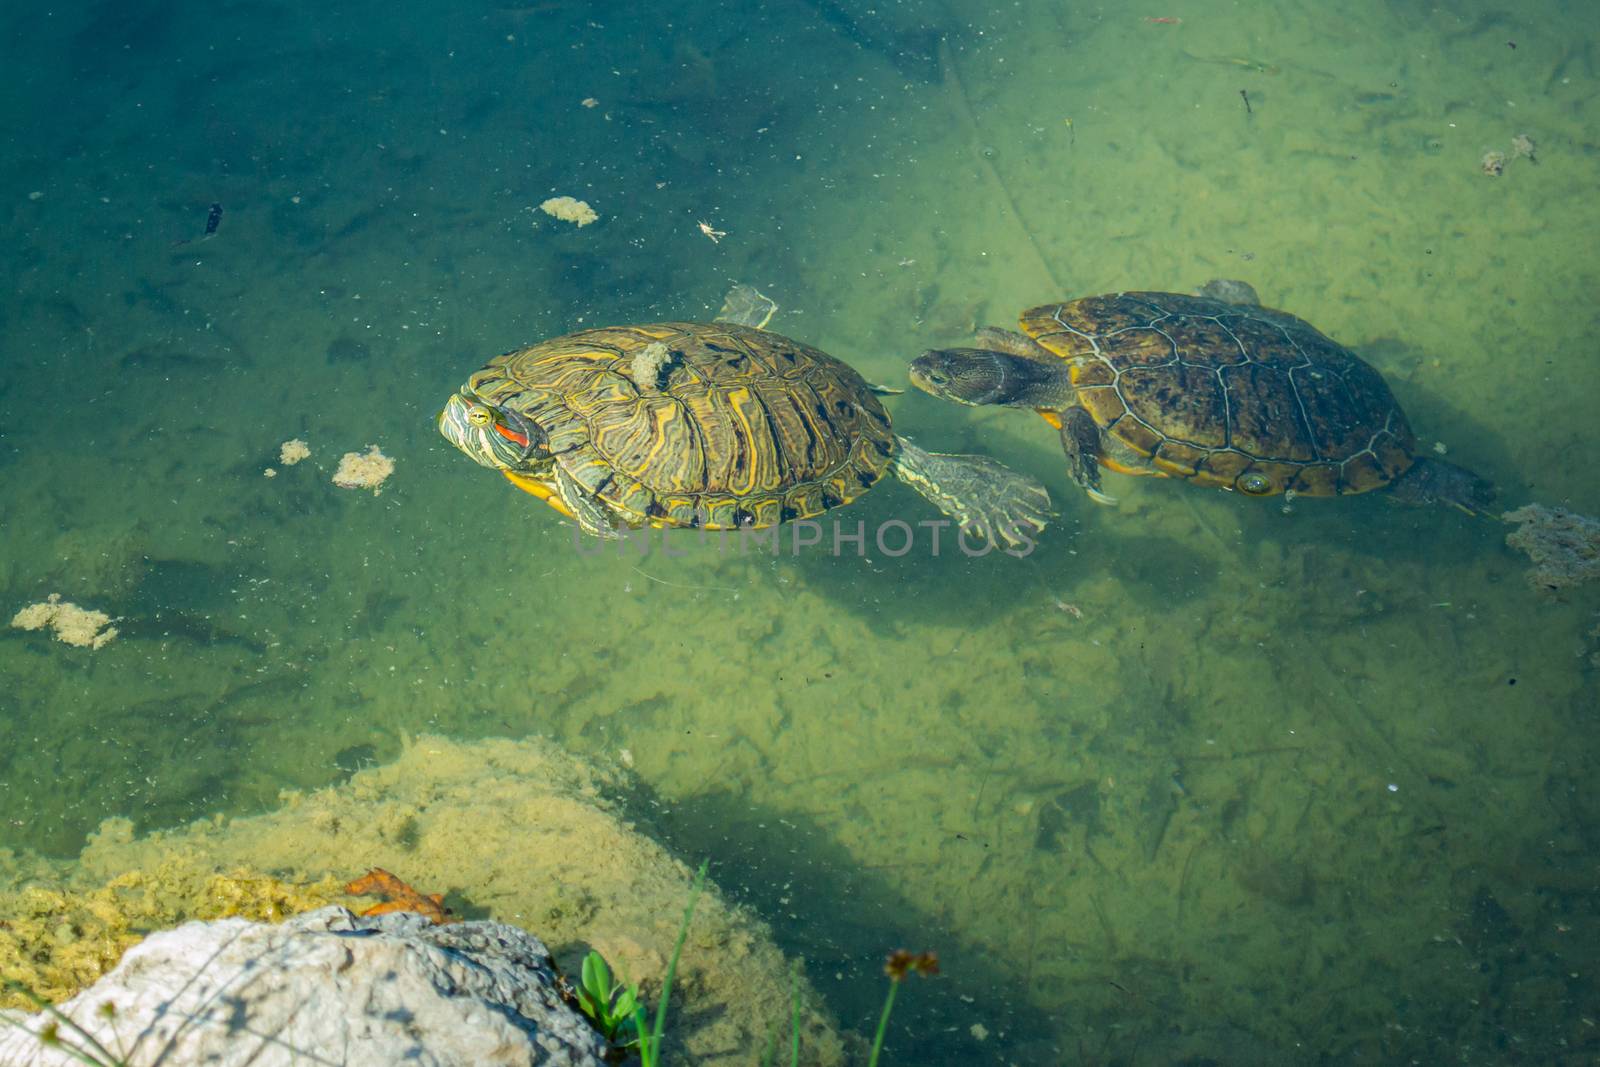 2 pond slider turtles (Trachemys scripta) are swimming in a pond on a sunny day. Horizontal stock image.